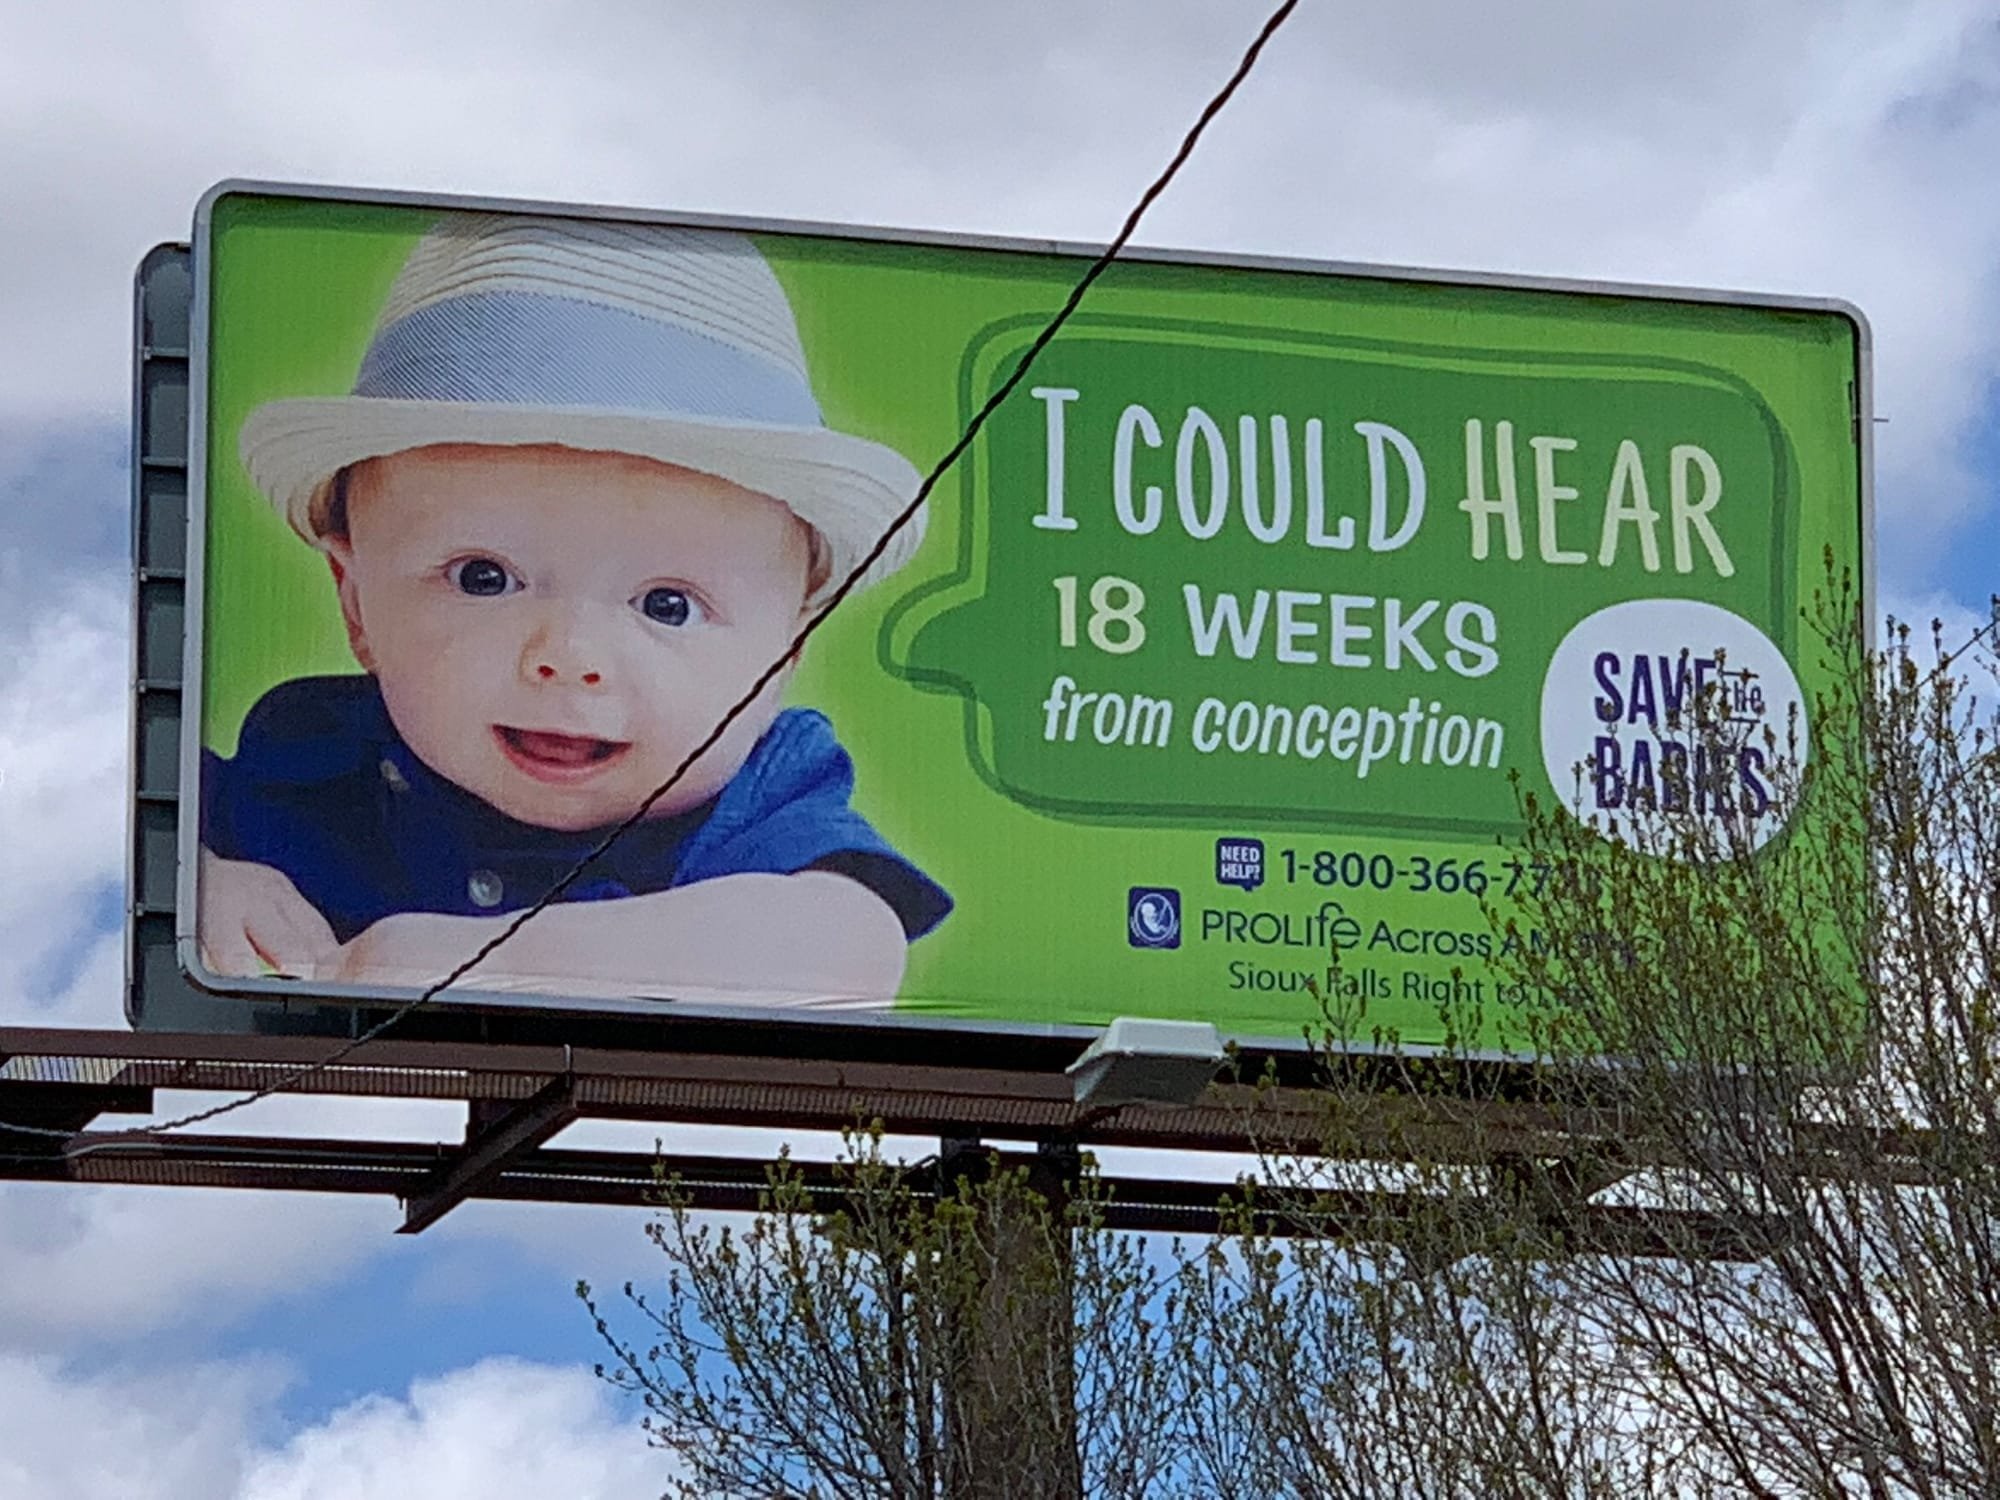 S Western Ave - Designed by Pro Life Across America